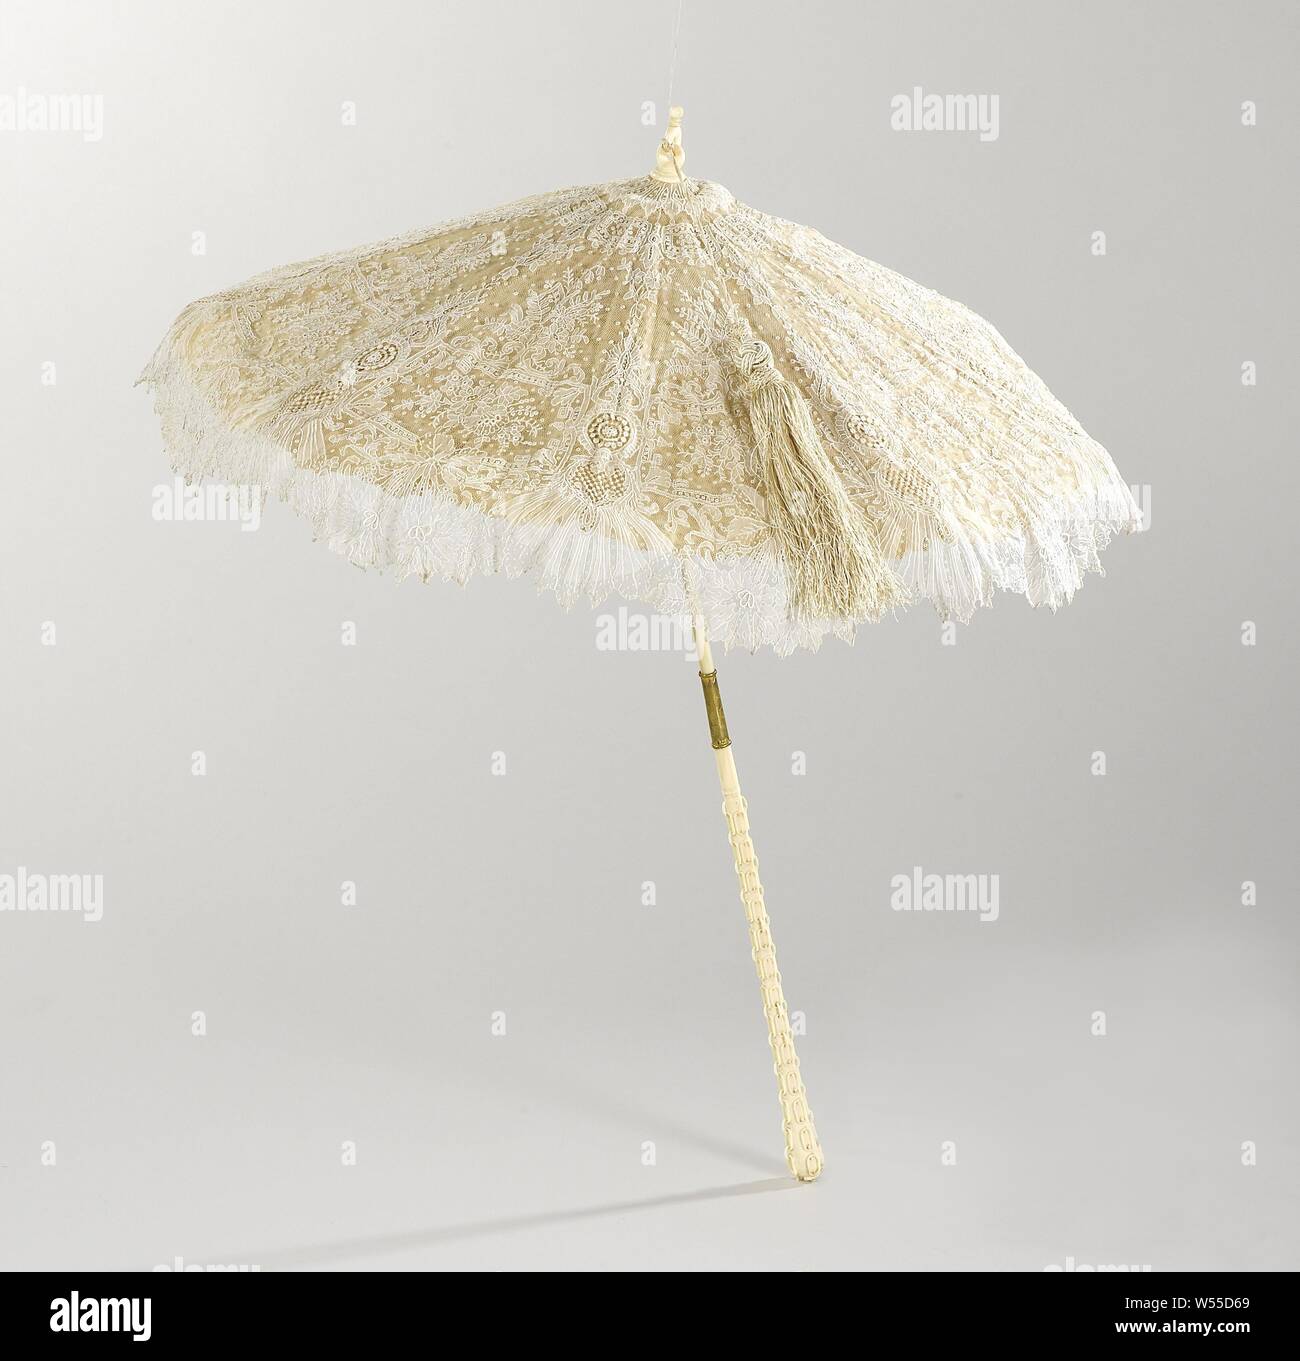 Parasol with 'point de gaze de Bruxelles' needlepoint lace on stick of, cut like link chain, ivory, Parasol with needle lace edge, 'point de gaze de Bruxelles', on an ivory silk lower deck. The lace has a pattern of medallions and heart-shaped cartouches between fields with daisies and other flowers. The deck is lined with lavender-colored ponjé silk. Eight whale whale ribs. Stick of ivory, cut with chains. Halfway through a copper slider that can be slid up, after which the stick can buckle. On top of an ivory button, in the form of two links, with a long ivory-colored brush., anonymous Stock Photo